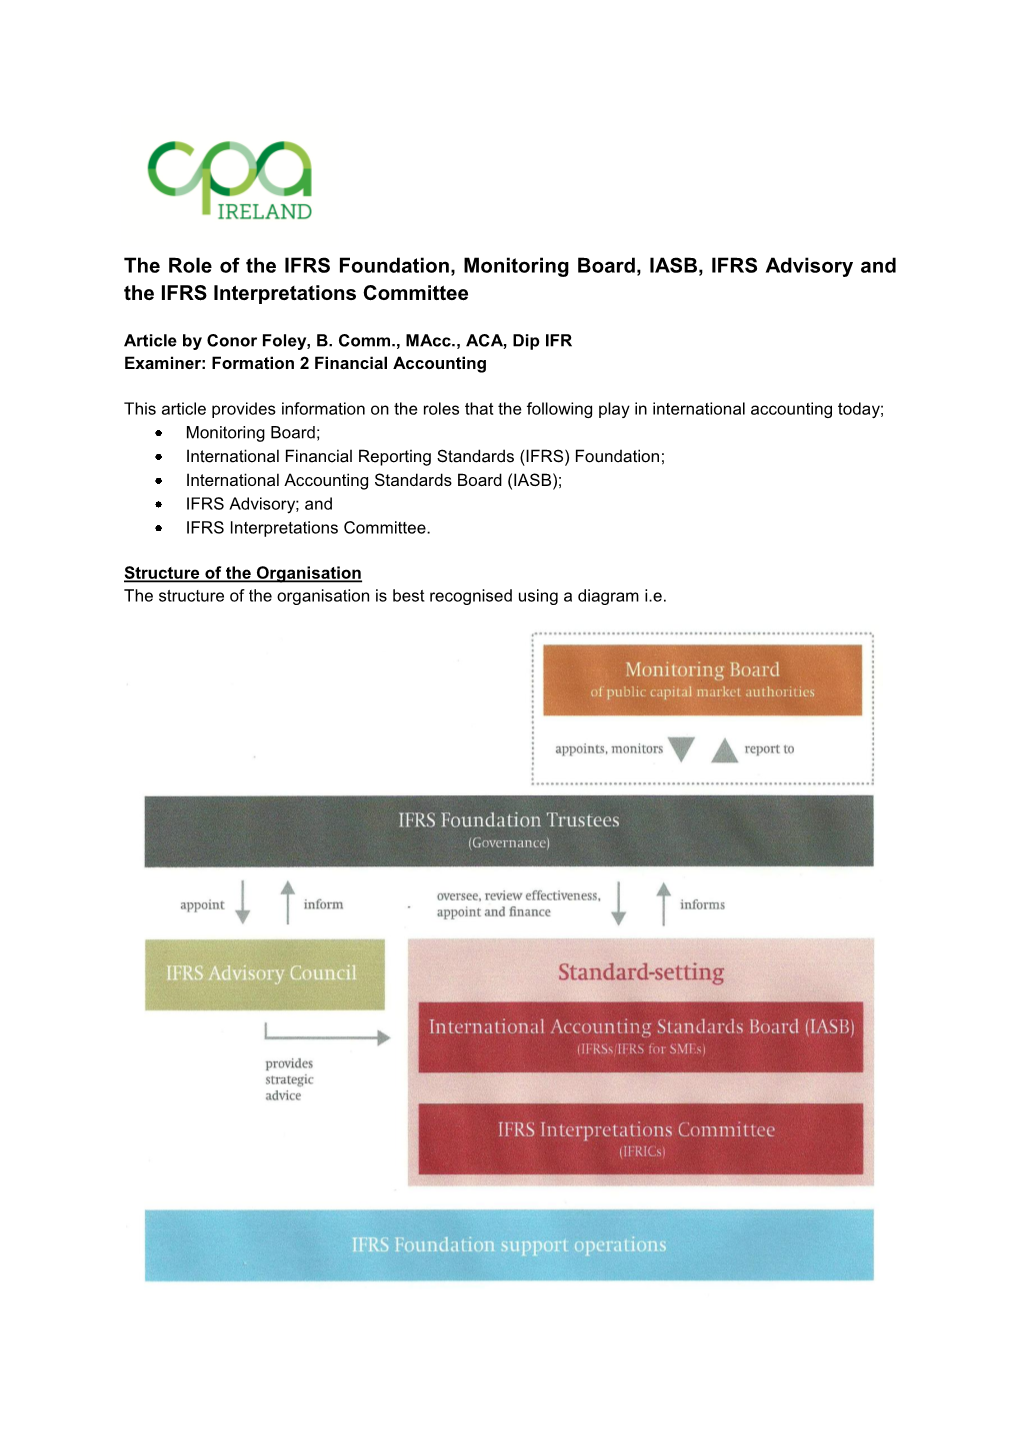 The Role of the IFRS Foundation, Monitoring Board, IASB, IFRS Advisory and the IFRS Interpretations Committee